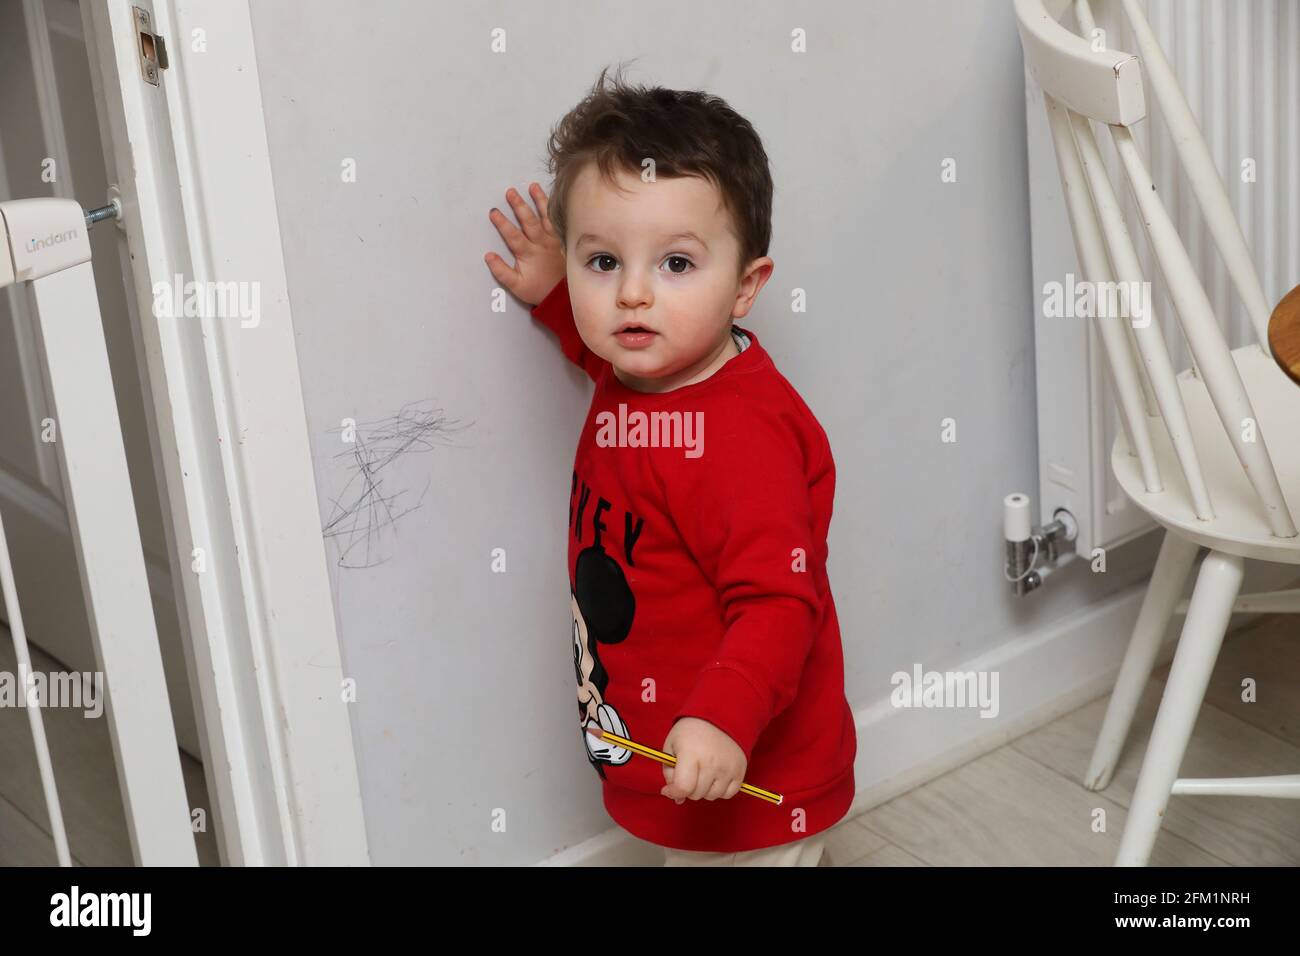 A young boy pictured drawing on the walls with a pencil in West Sussex, UK. Stock Photo